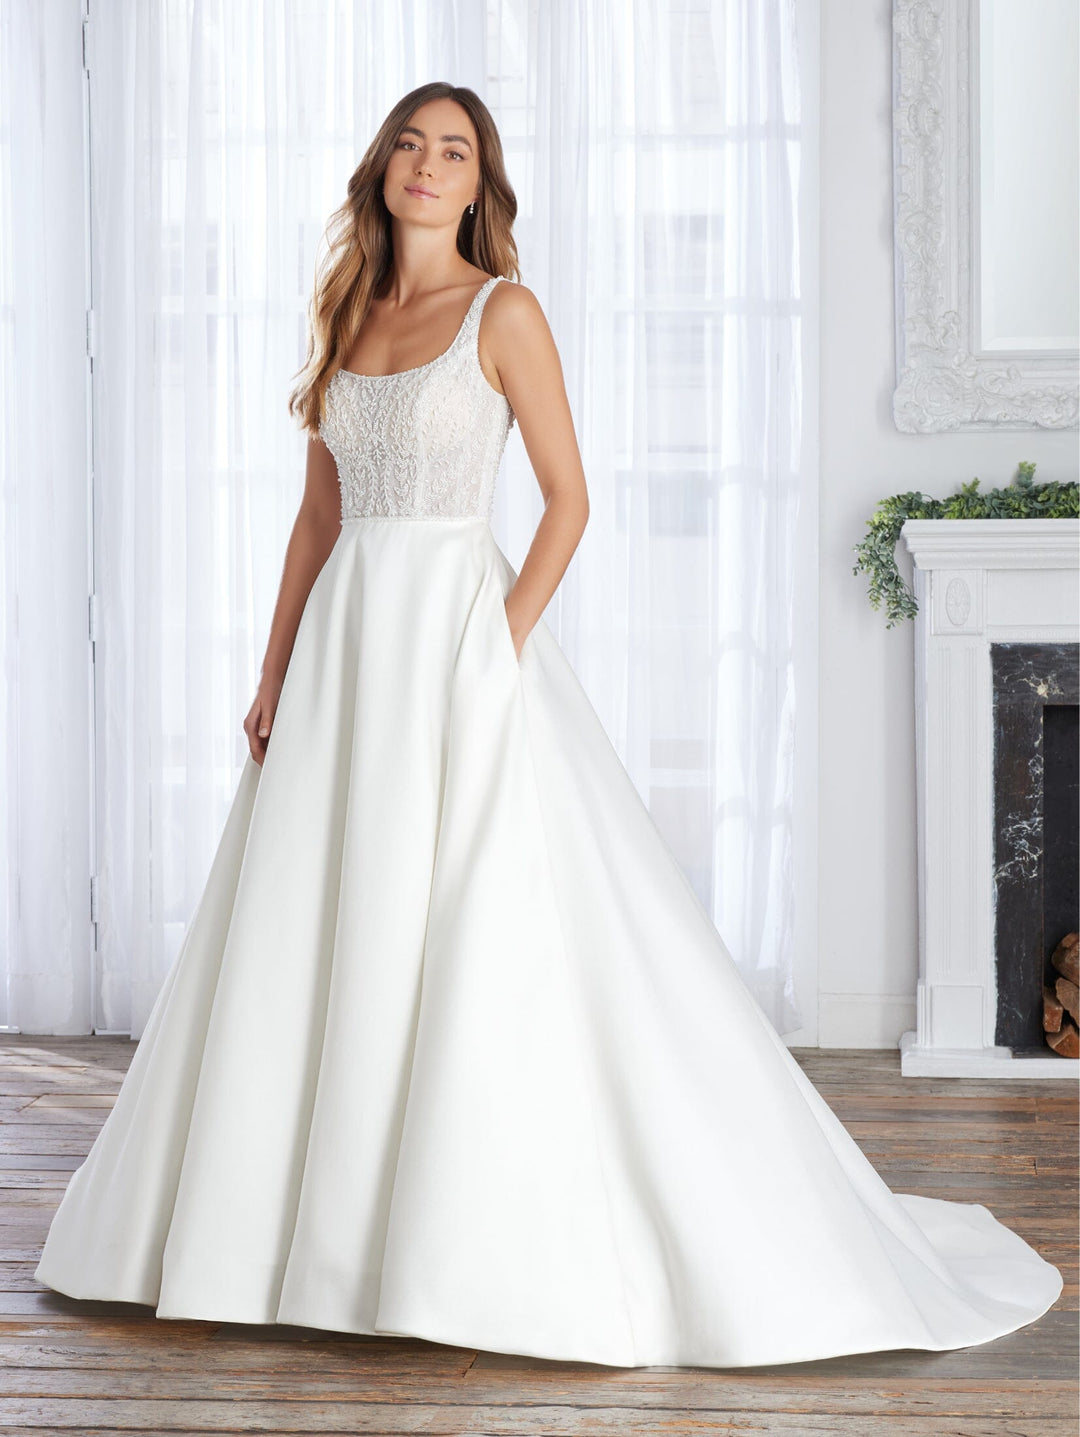 Beaded Mikado Sleeveless Bridal Gown by Adrianna Papell 31227